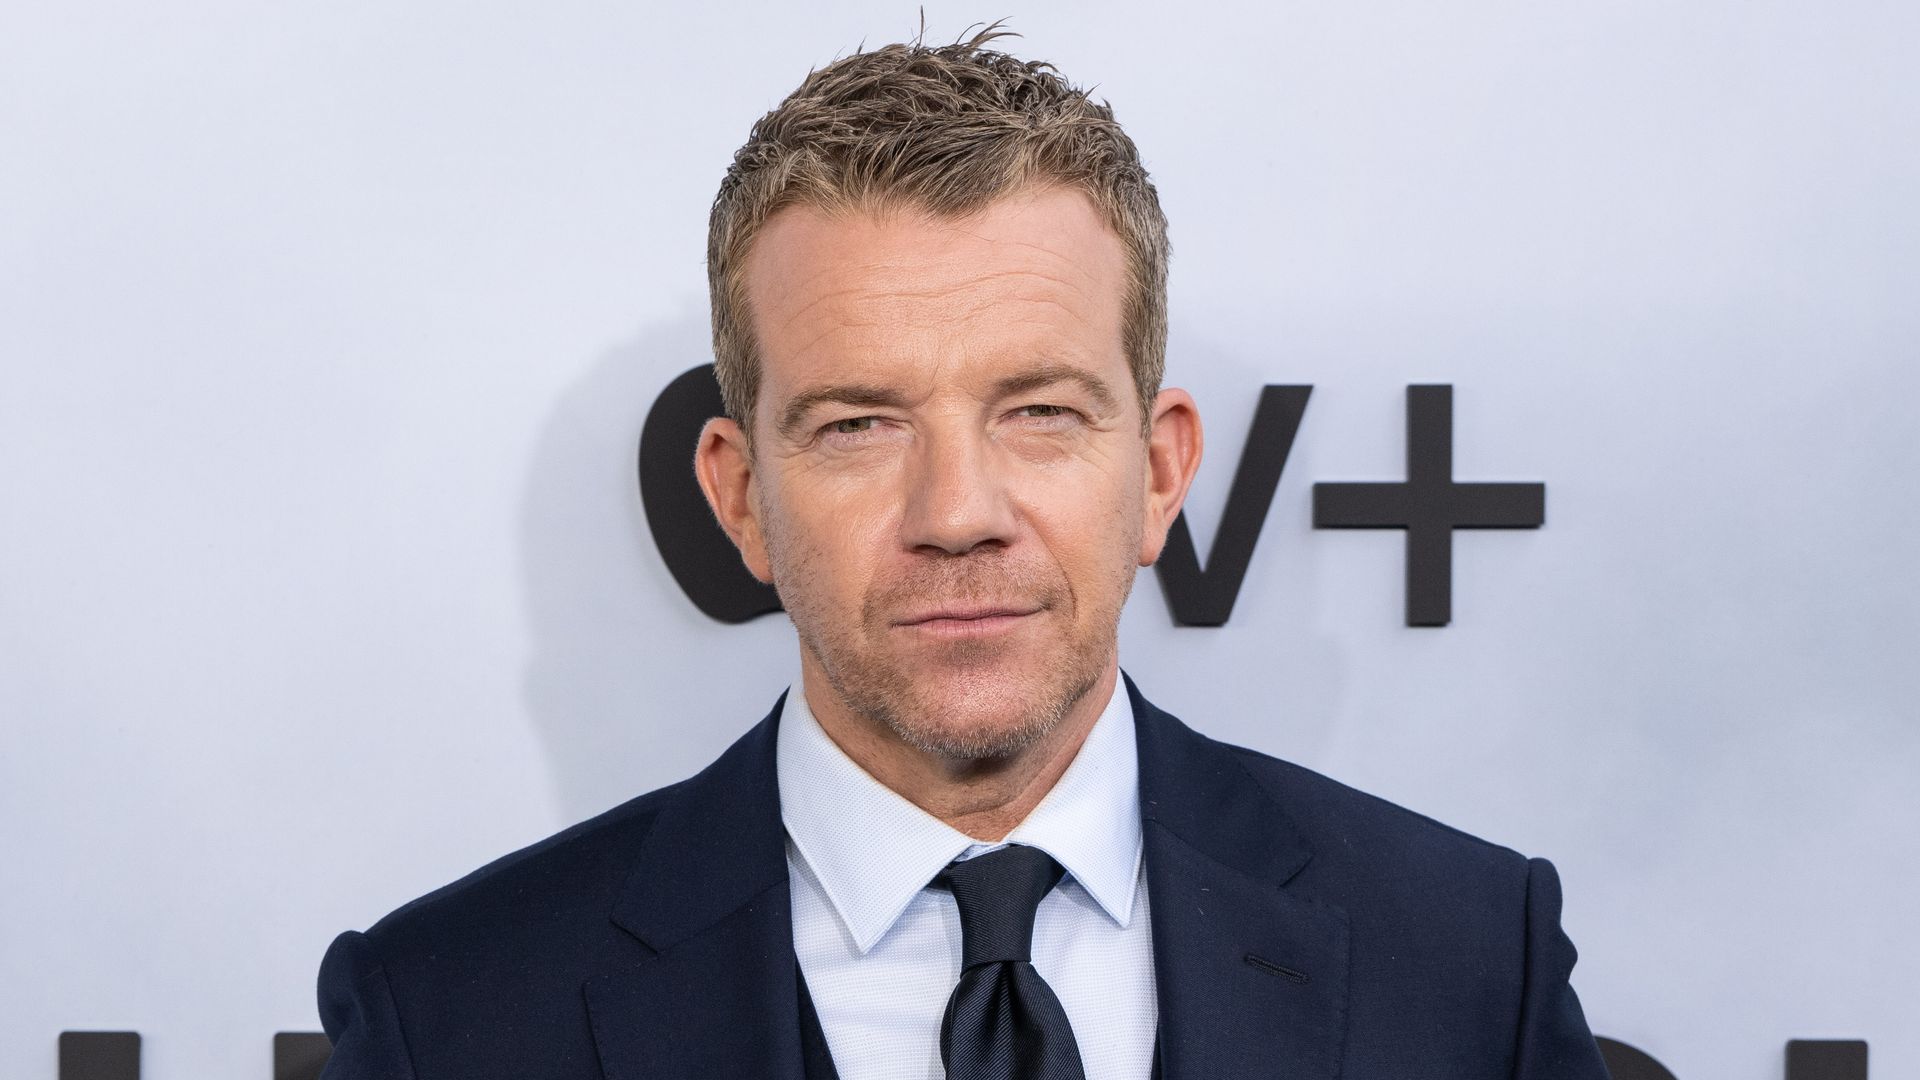 Max Beesley posing for photos at a premiere